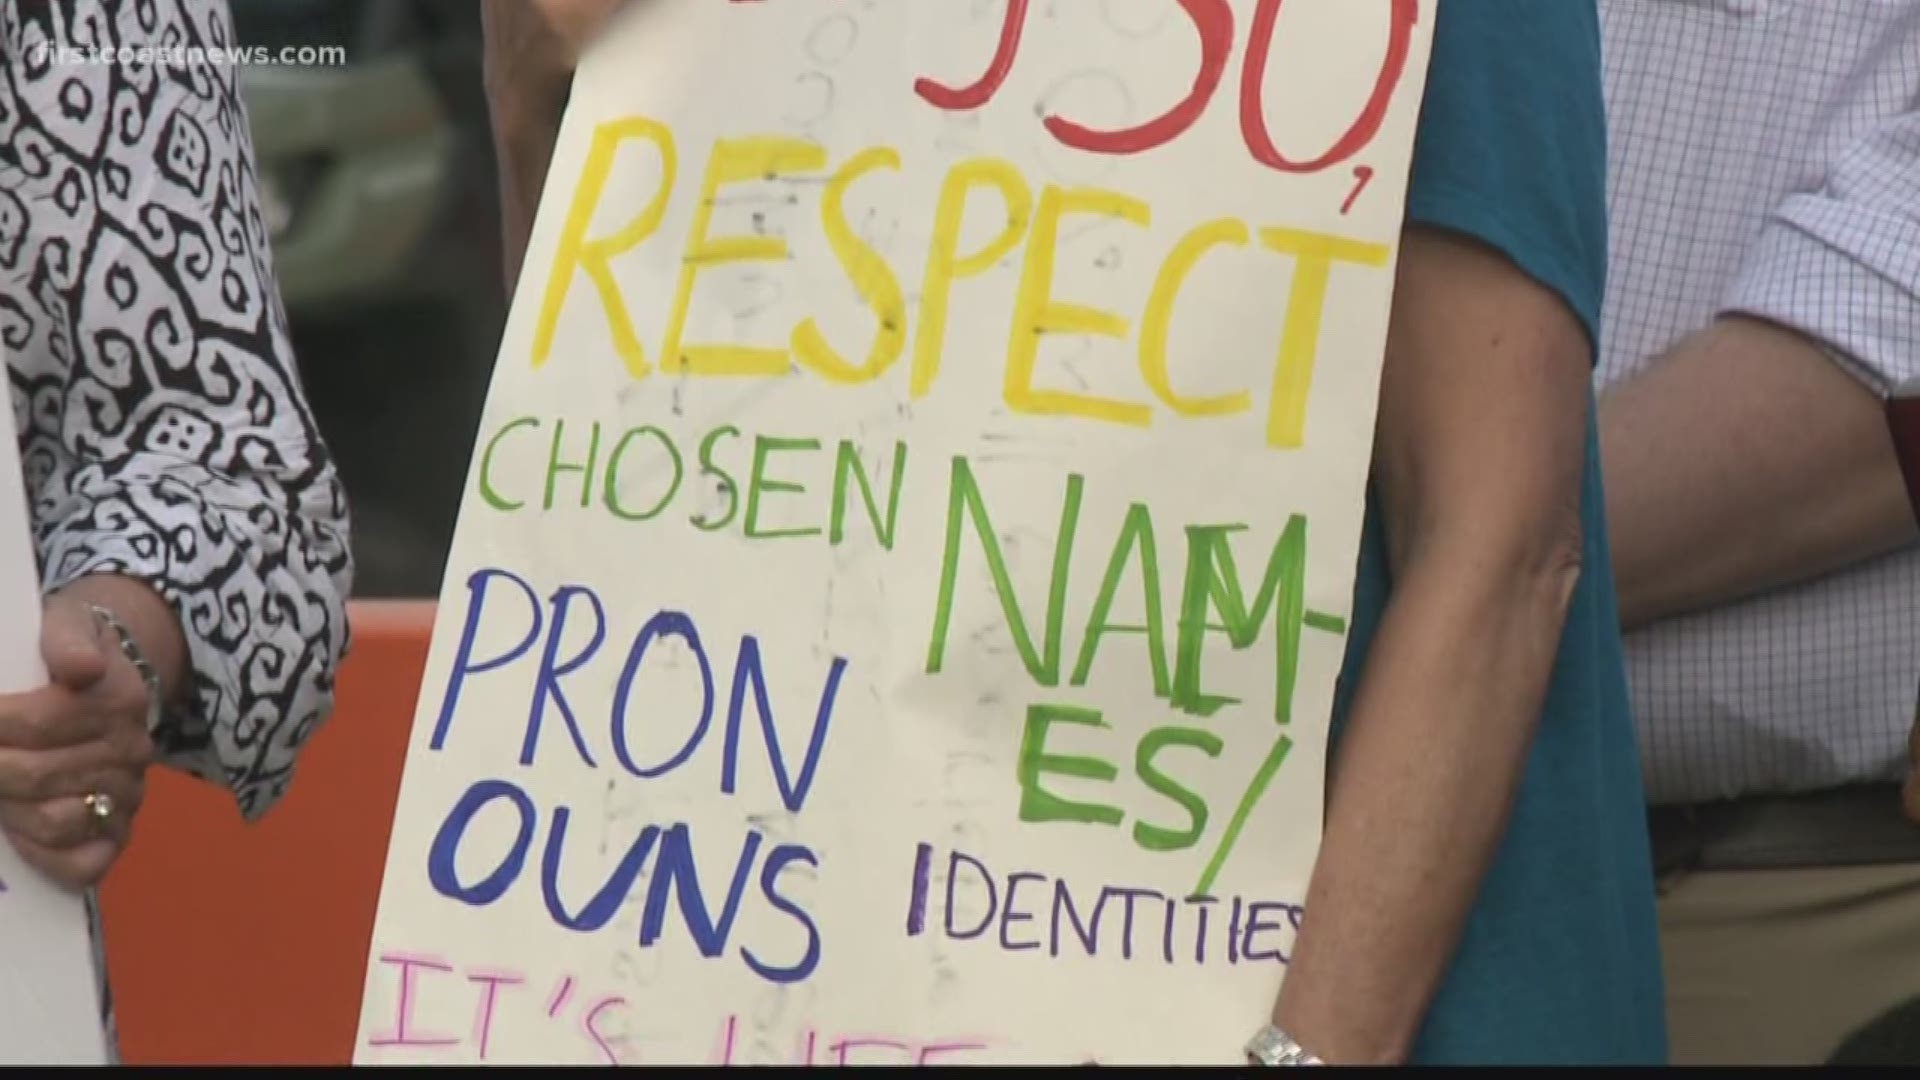 For the second night in a row, demonstrators are calling for a new sheriff and for a transgender liason following the murder of a transgender woman on the Southside over the weekend.